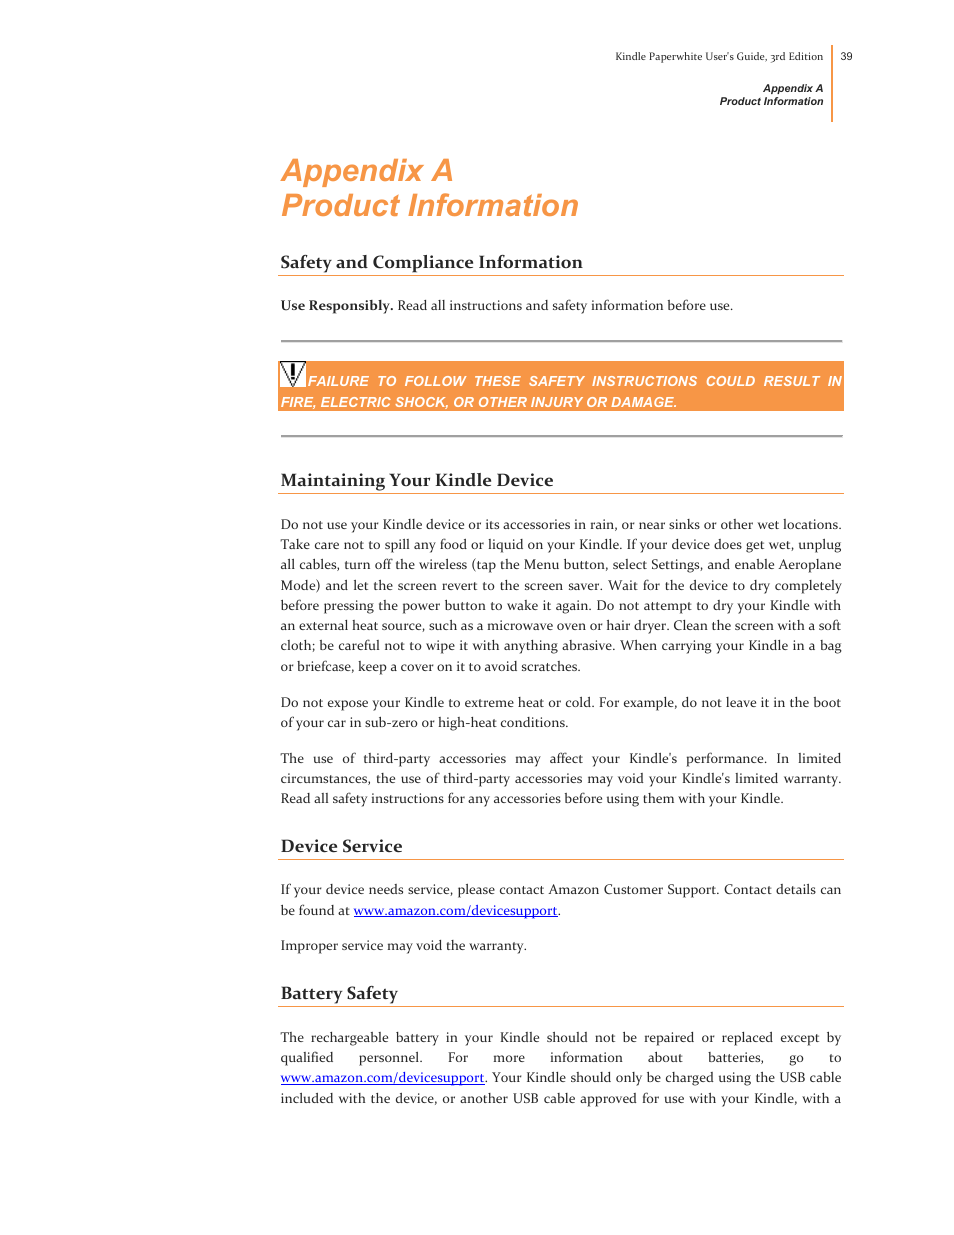 Appendix a product information, Safety and compliance information, Maintaining your kindle device | Device service, Battery safety | Kindle Paperwhite (2nd Generation) User Manual | Page 39 / 47